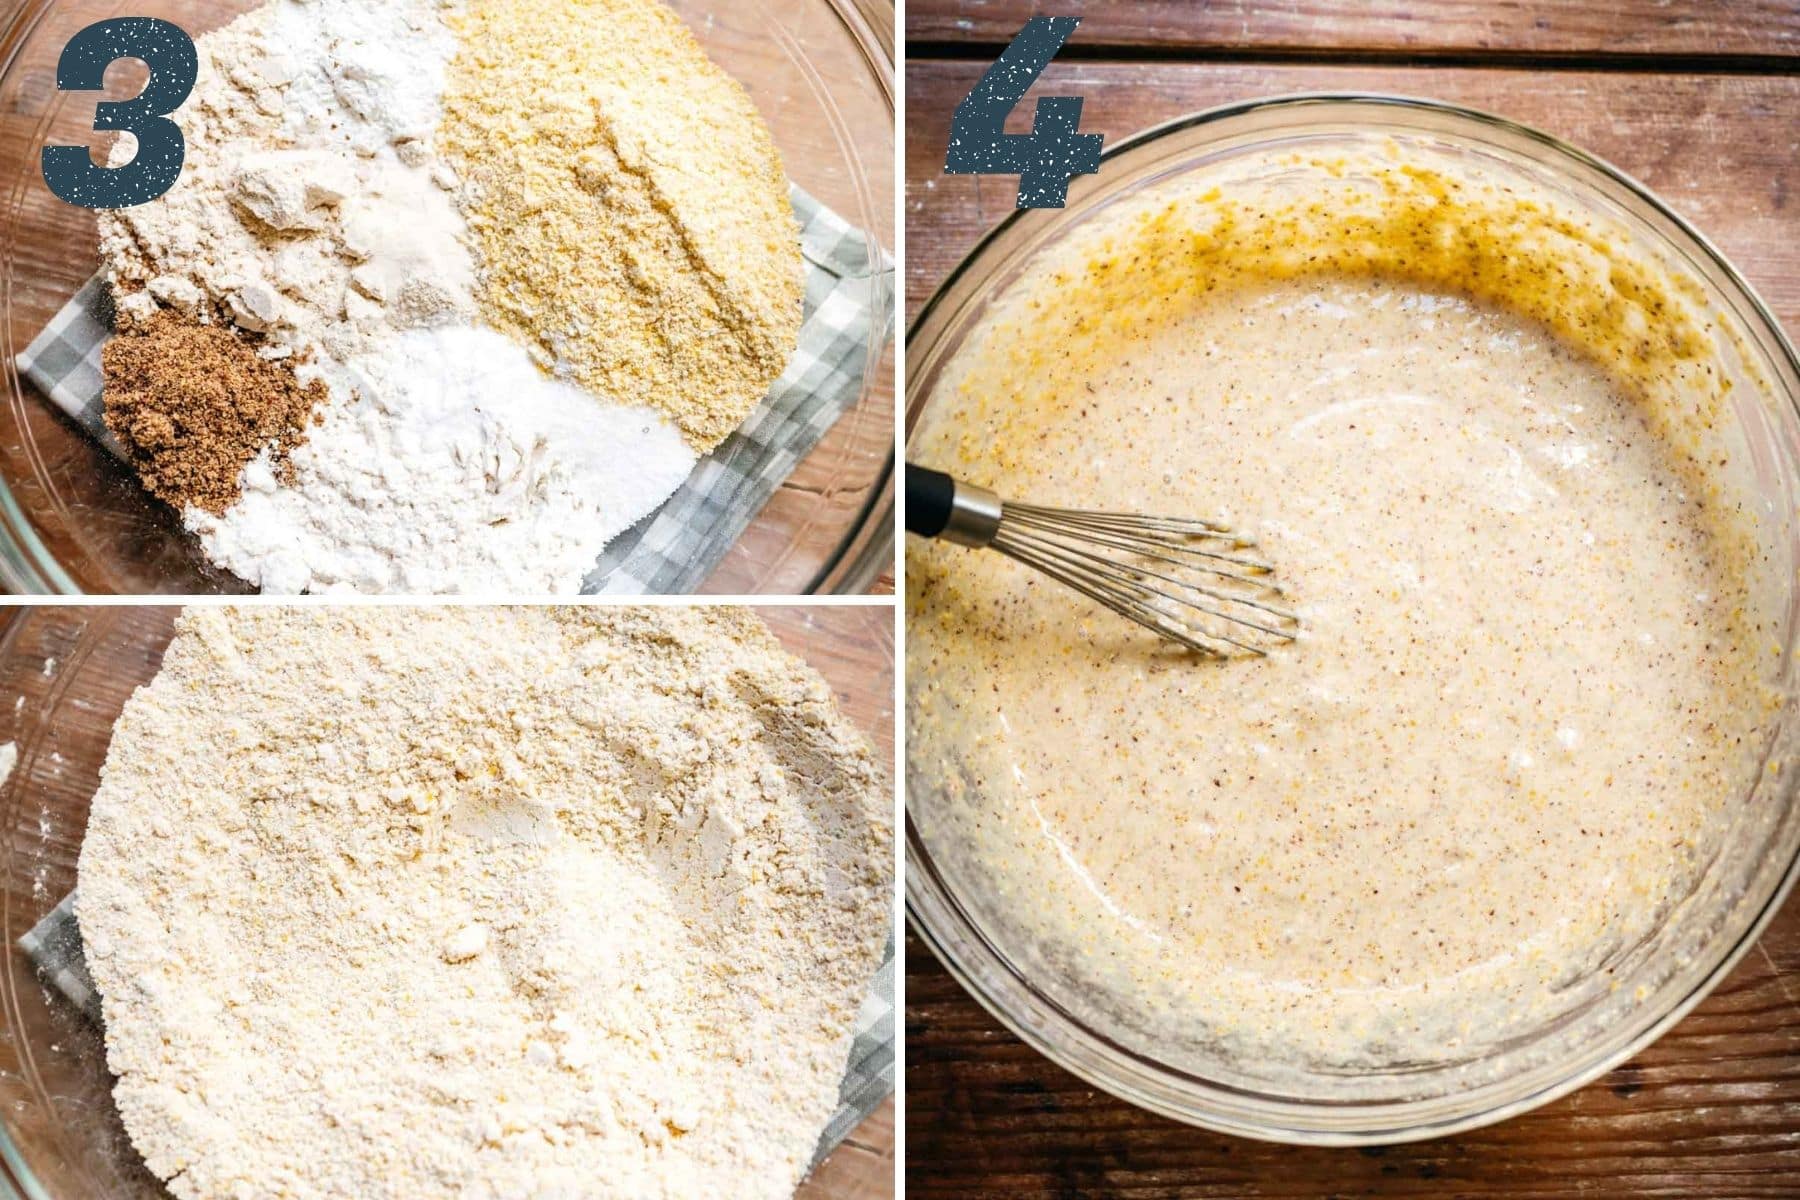 On the left: dry ingredients stirred together. On the right: stirring in the wet ingredients.